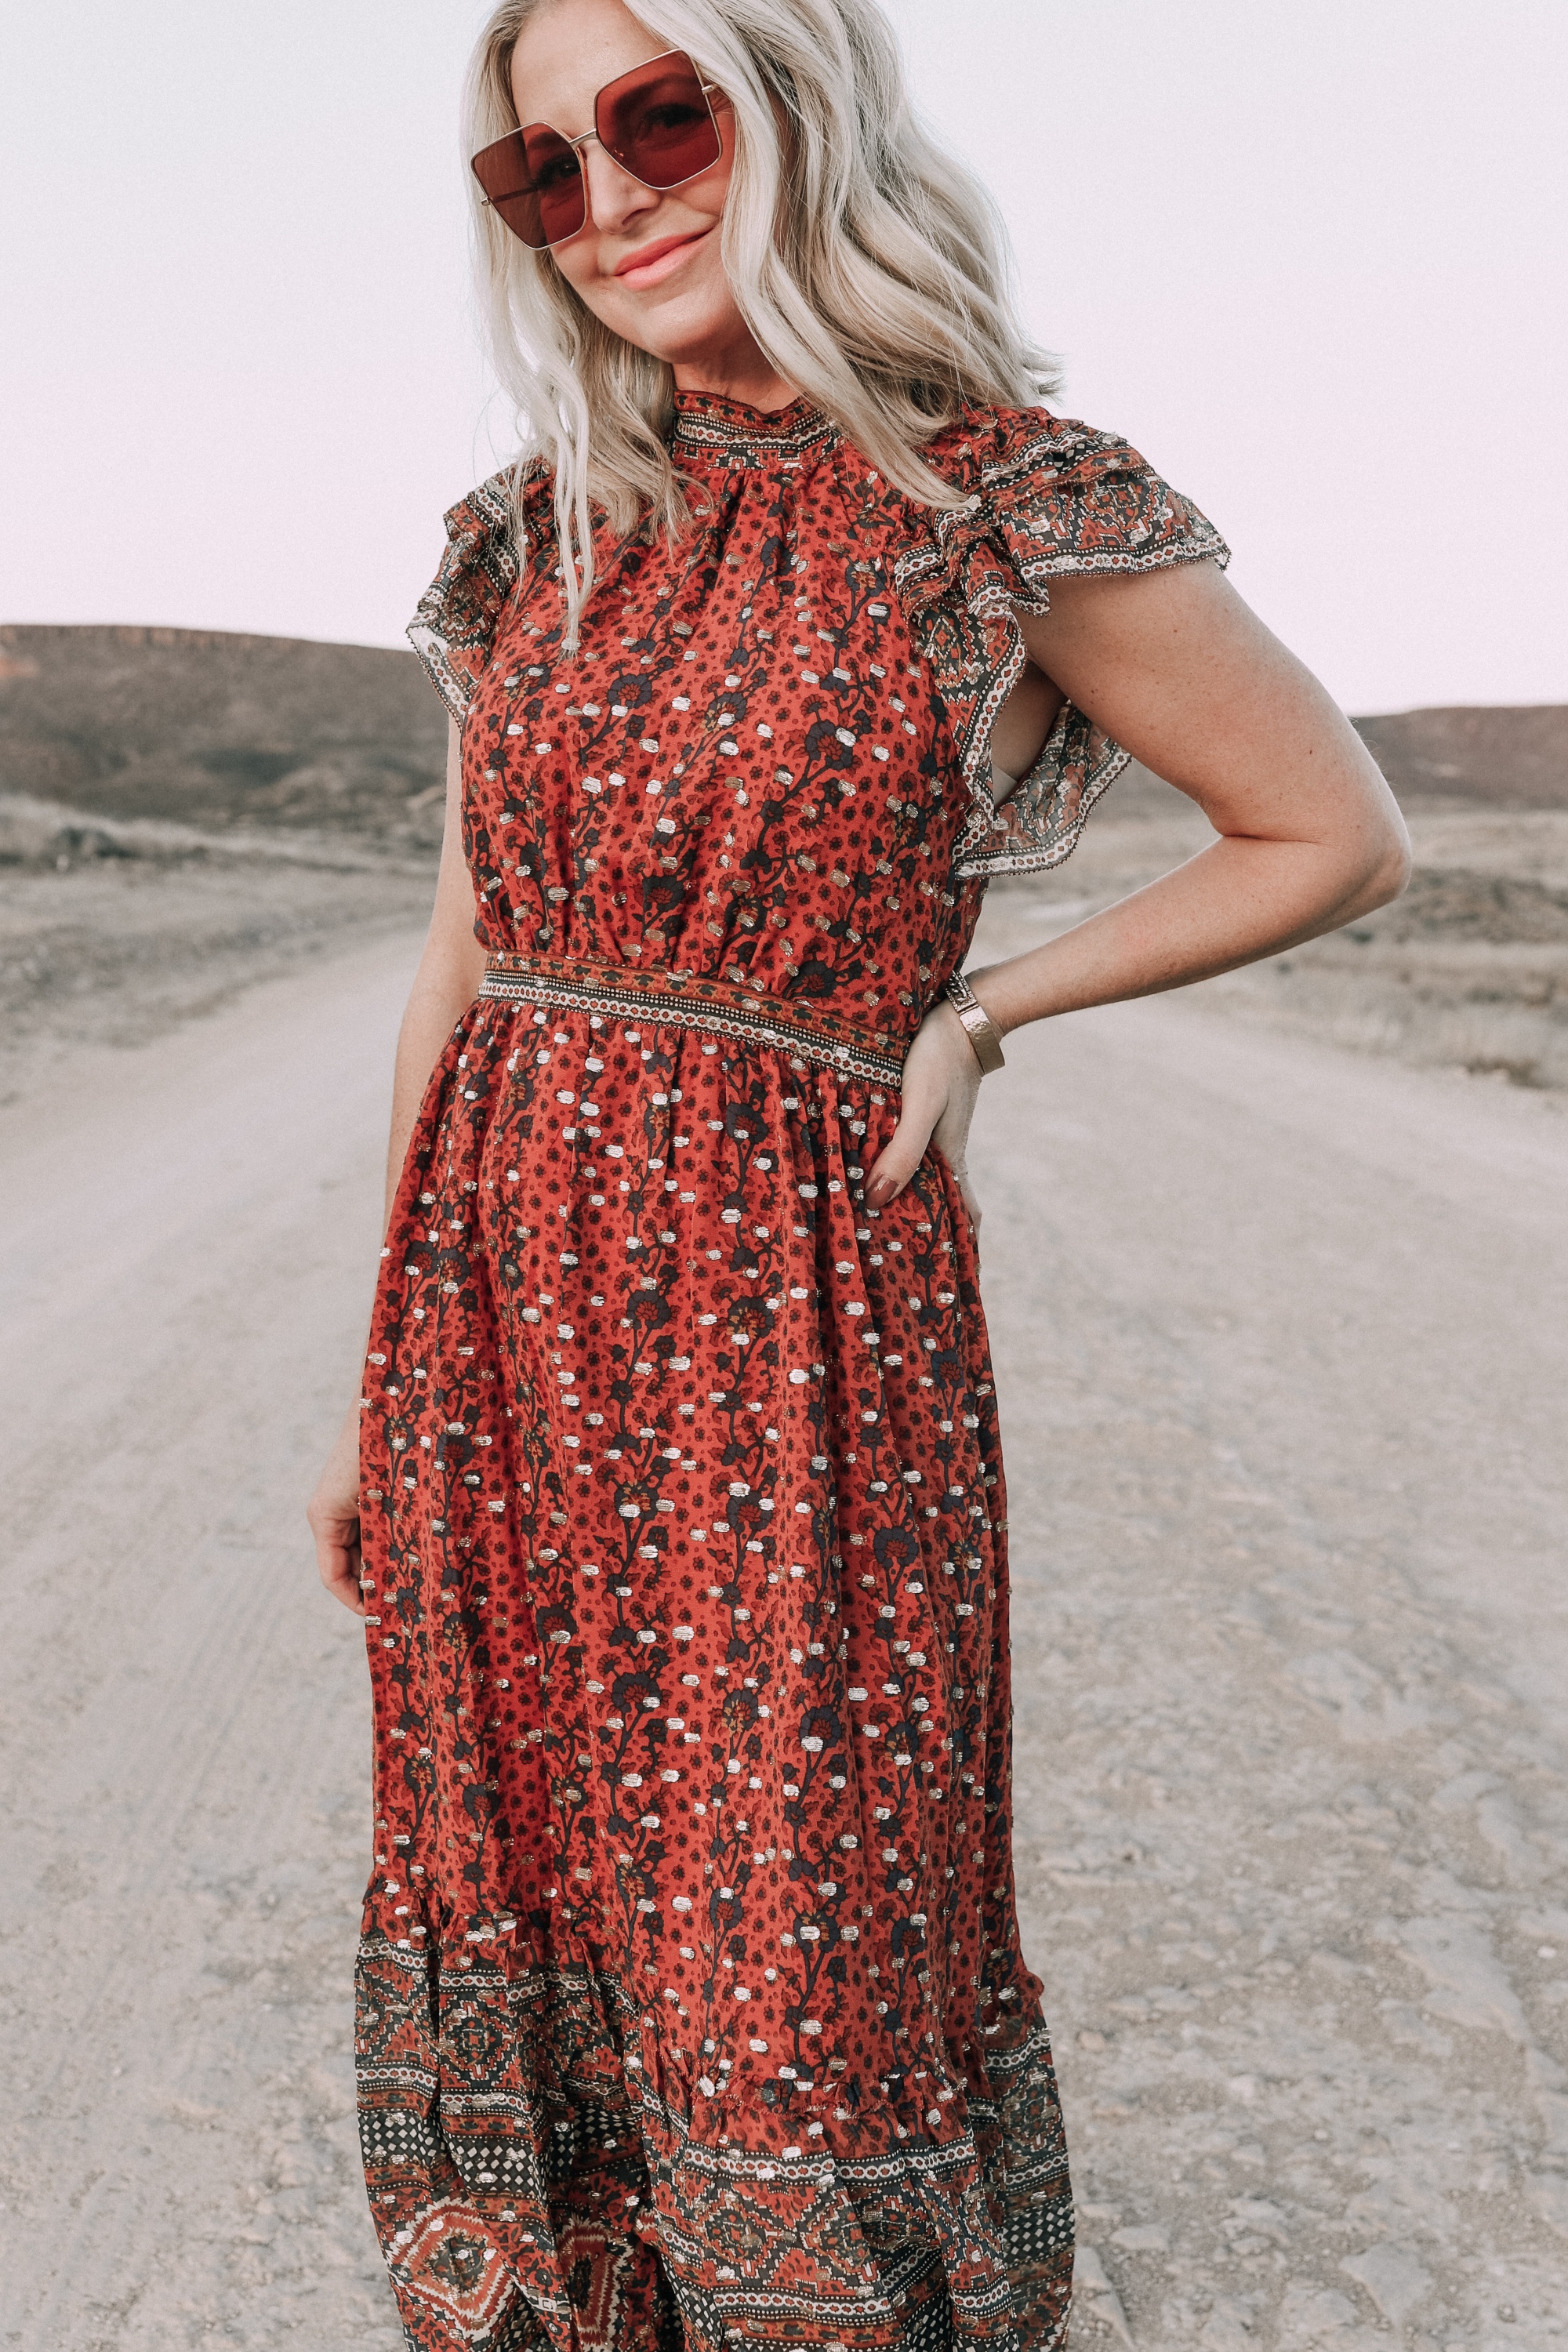 Ulla Johnson Alastair red Dress fashion blogger over 40 Busbee Style at Cibolo Creek Ranch in Texas